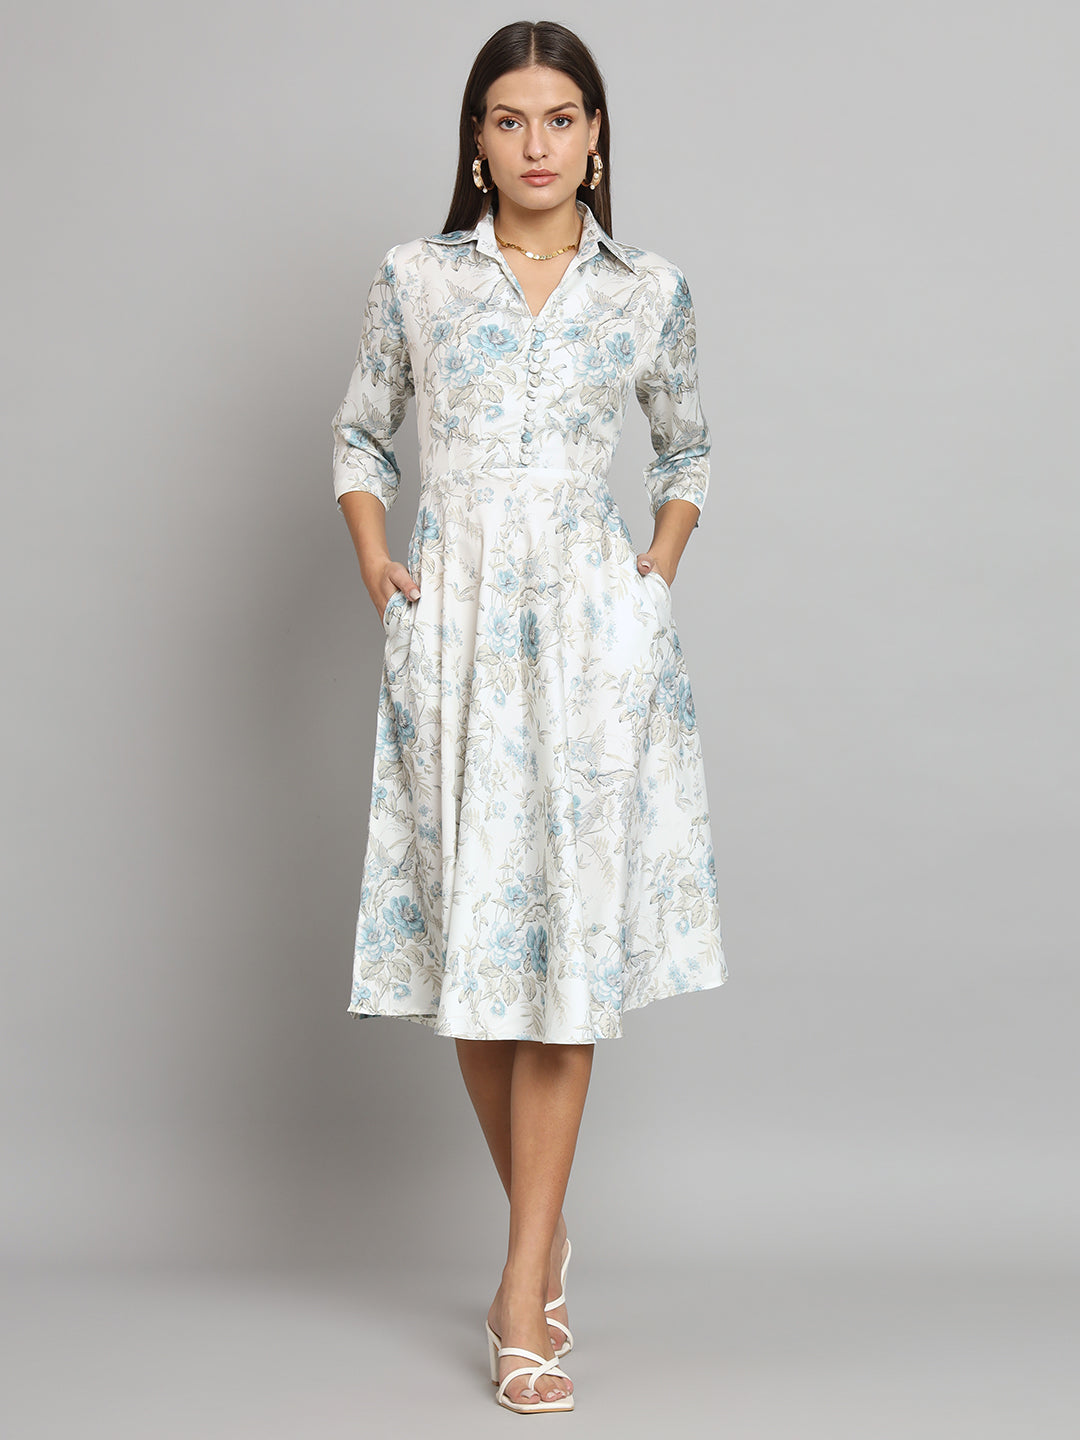 Collared Neck Floral Dress- White